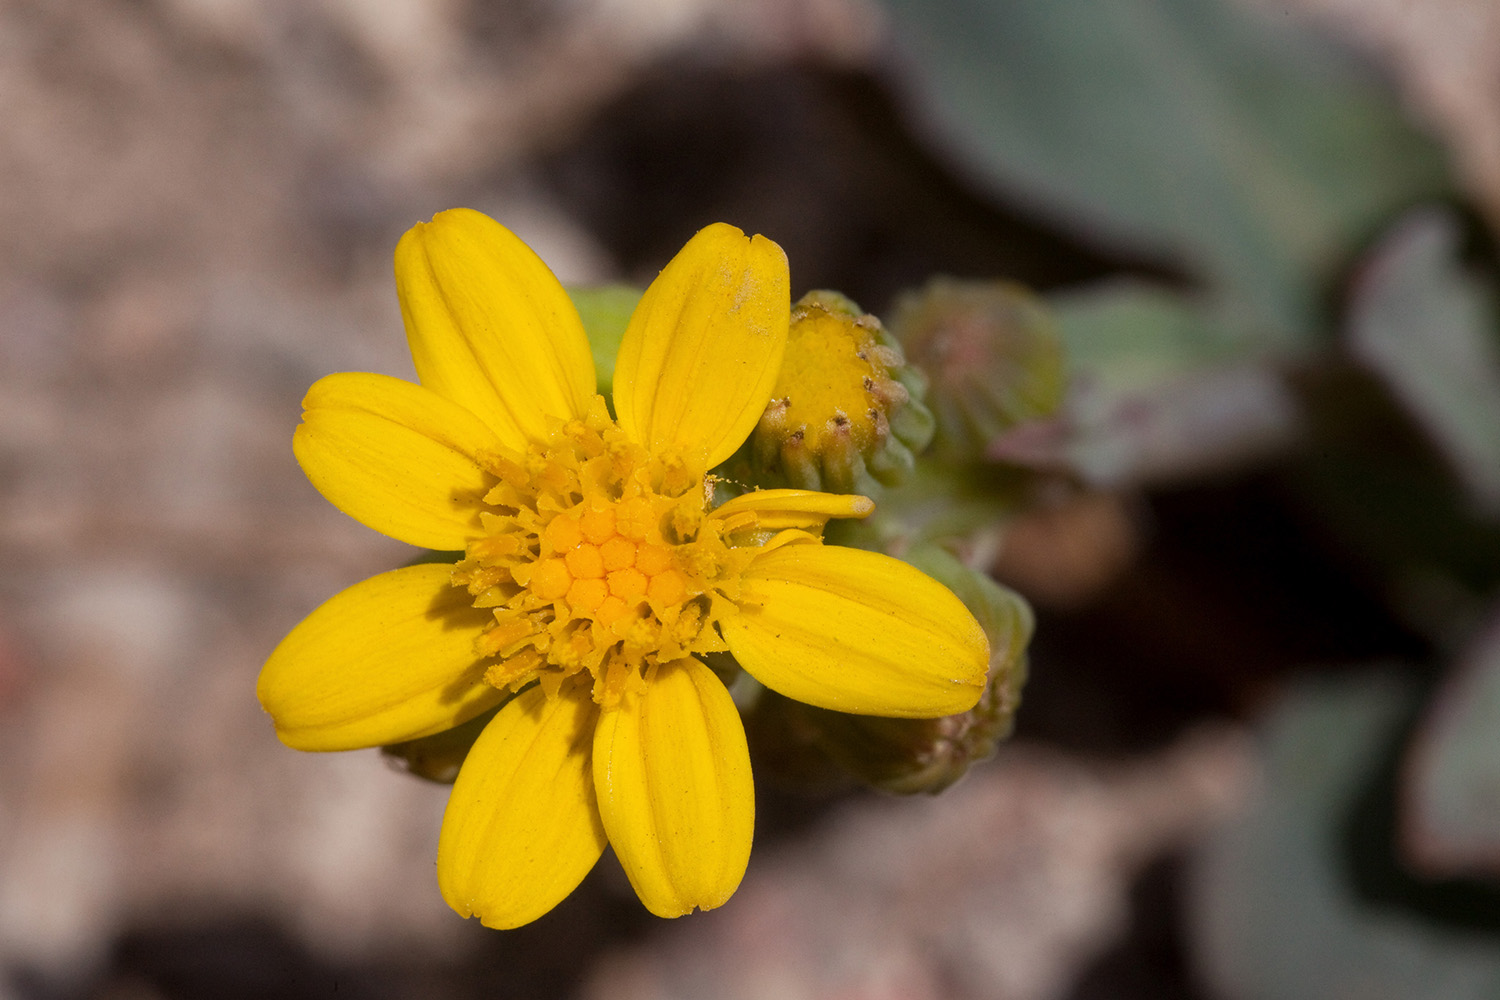 Senecio wootonii flower with small yellow rays and a darker yellow disk